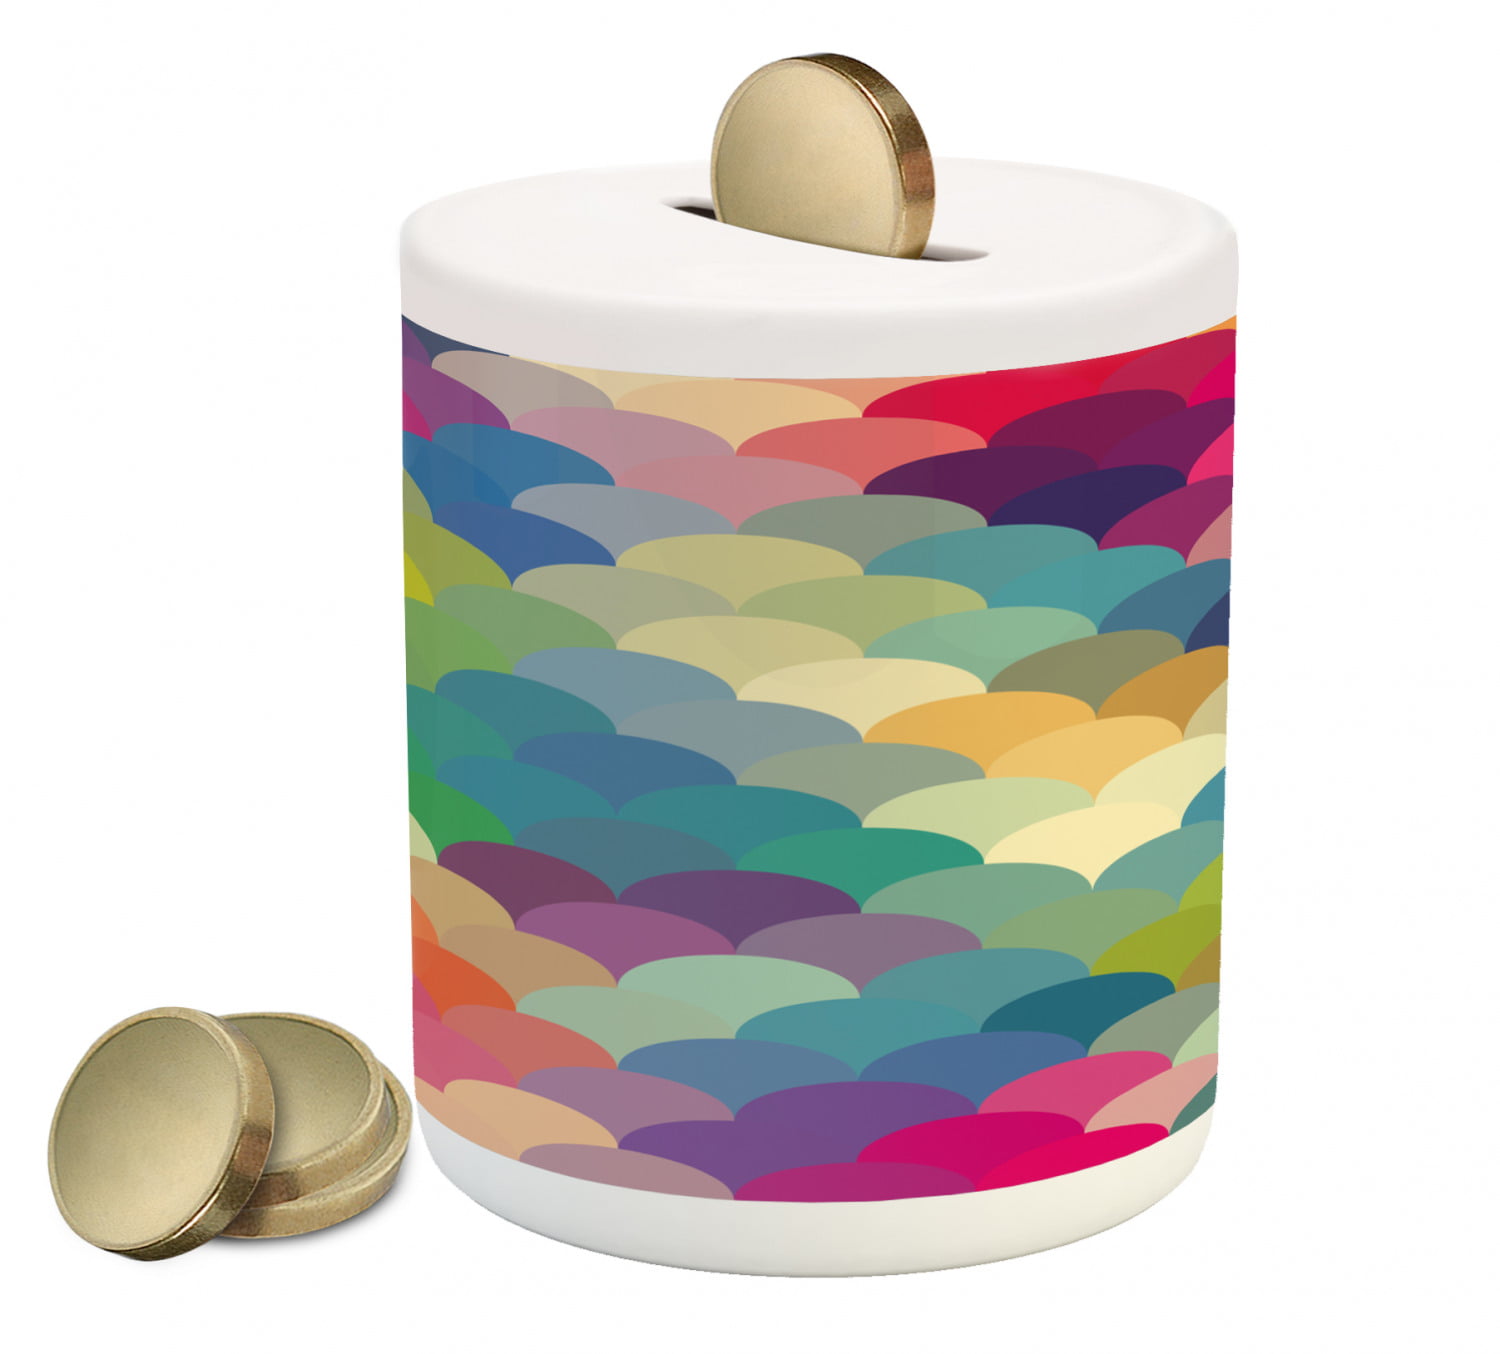 Mijnenveld vervormen Stadion Abstract Piggy Bank, Colorful Retro Style Scales Inspired Wave Pattern  Overlapping Circles Dots Tile, Ceramic Coin Bank Money Box for Cash Saving,  3.6" X 3.2", Multicolor, by Ambesonne - Walmart.com